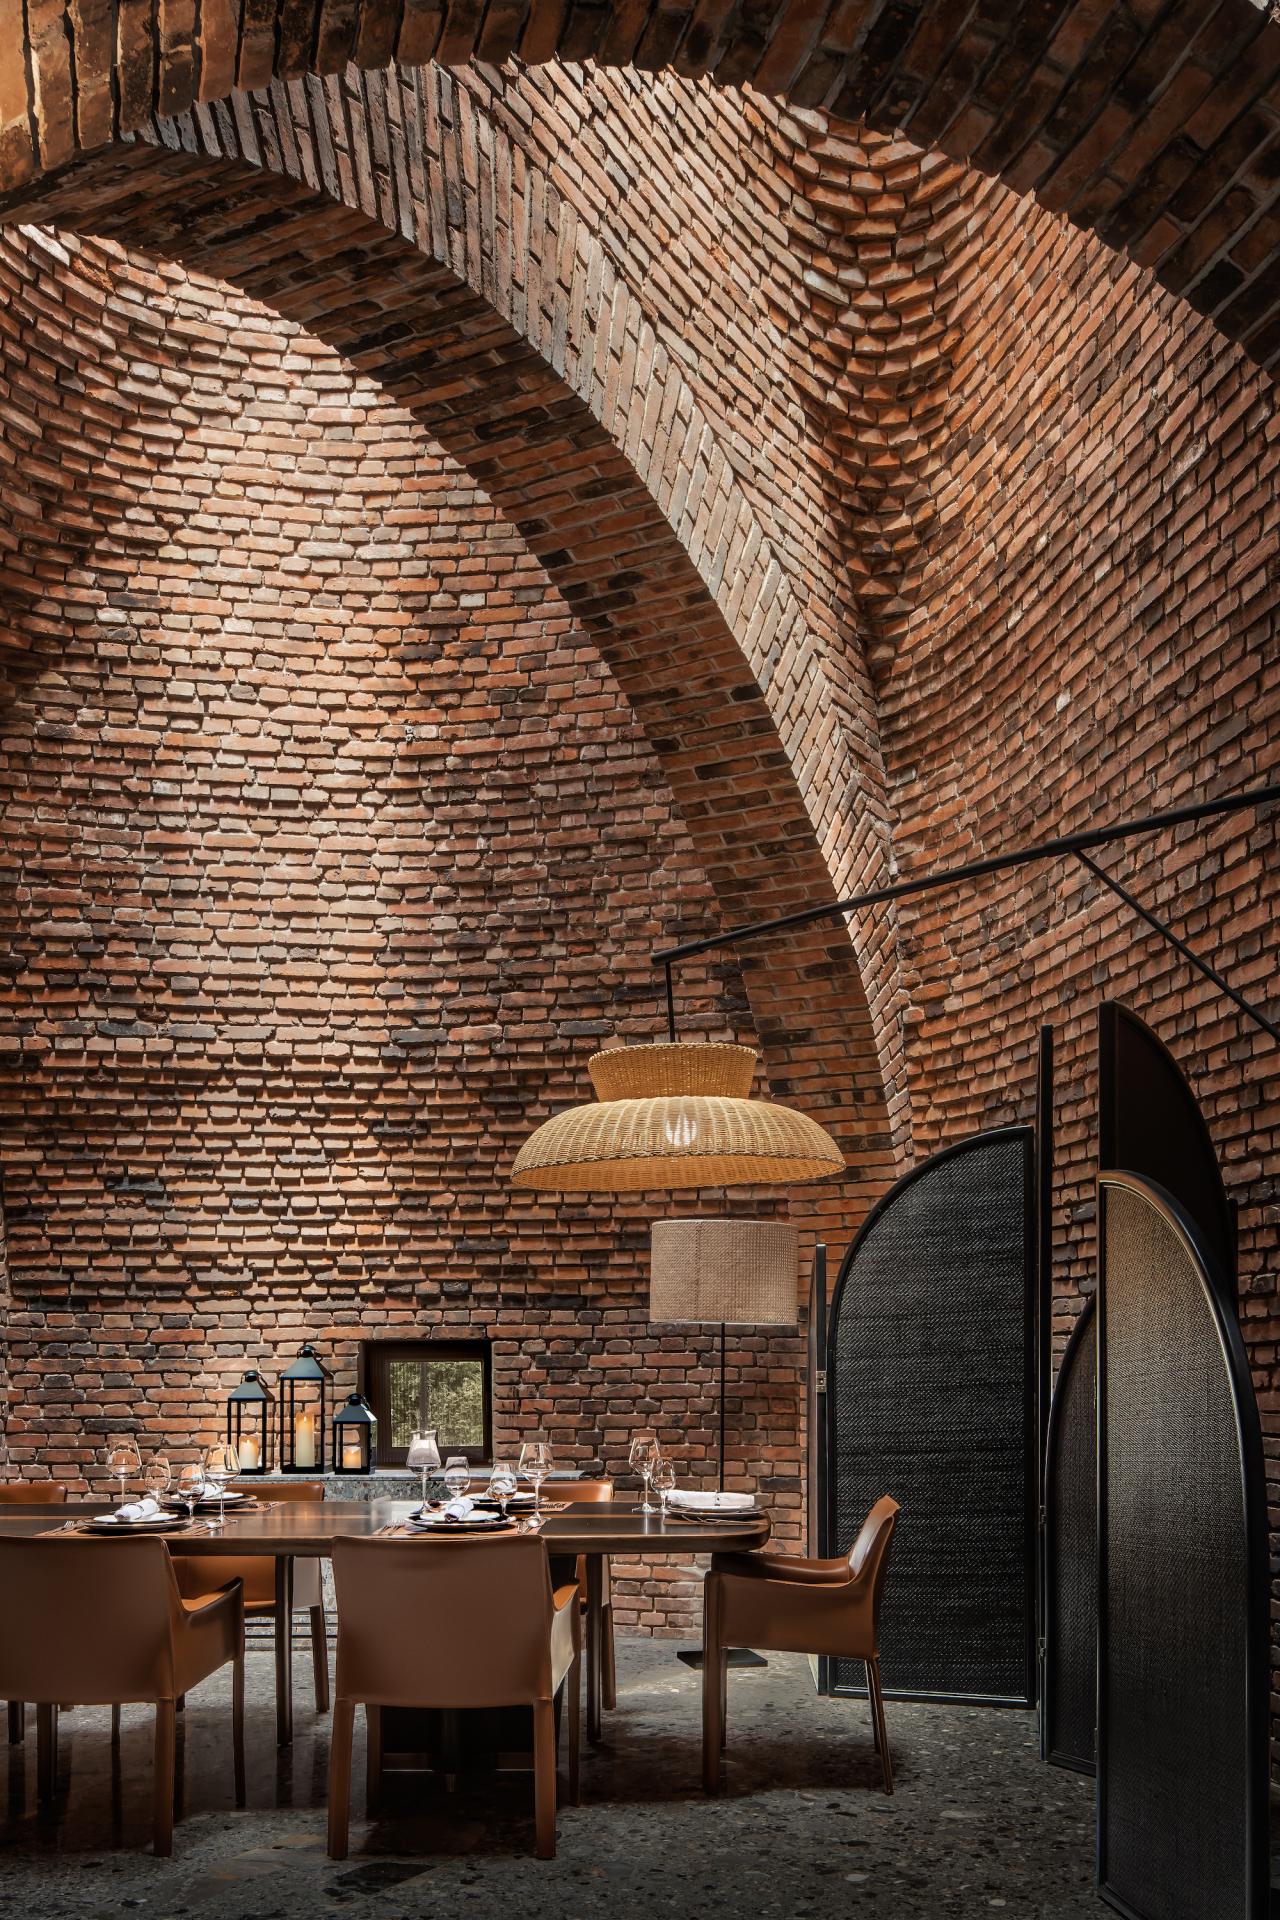 This Restaurant Nestled In A Red Brick Artwork Is A Feast For The Visual Senses